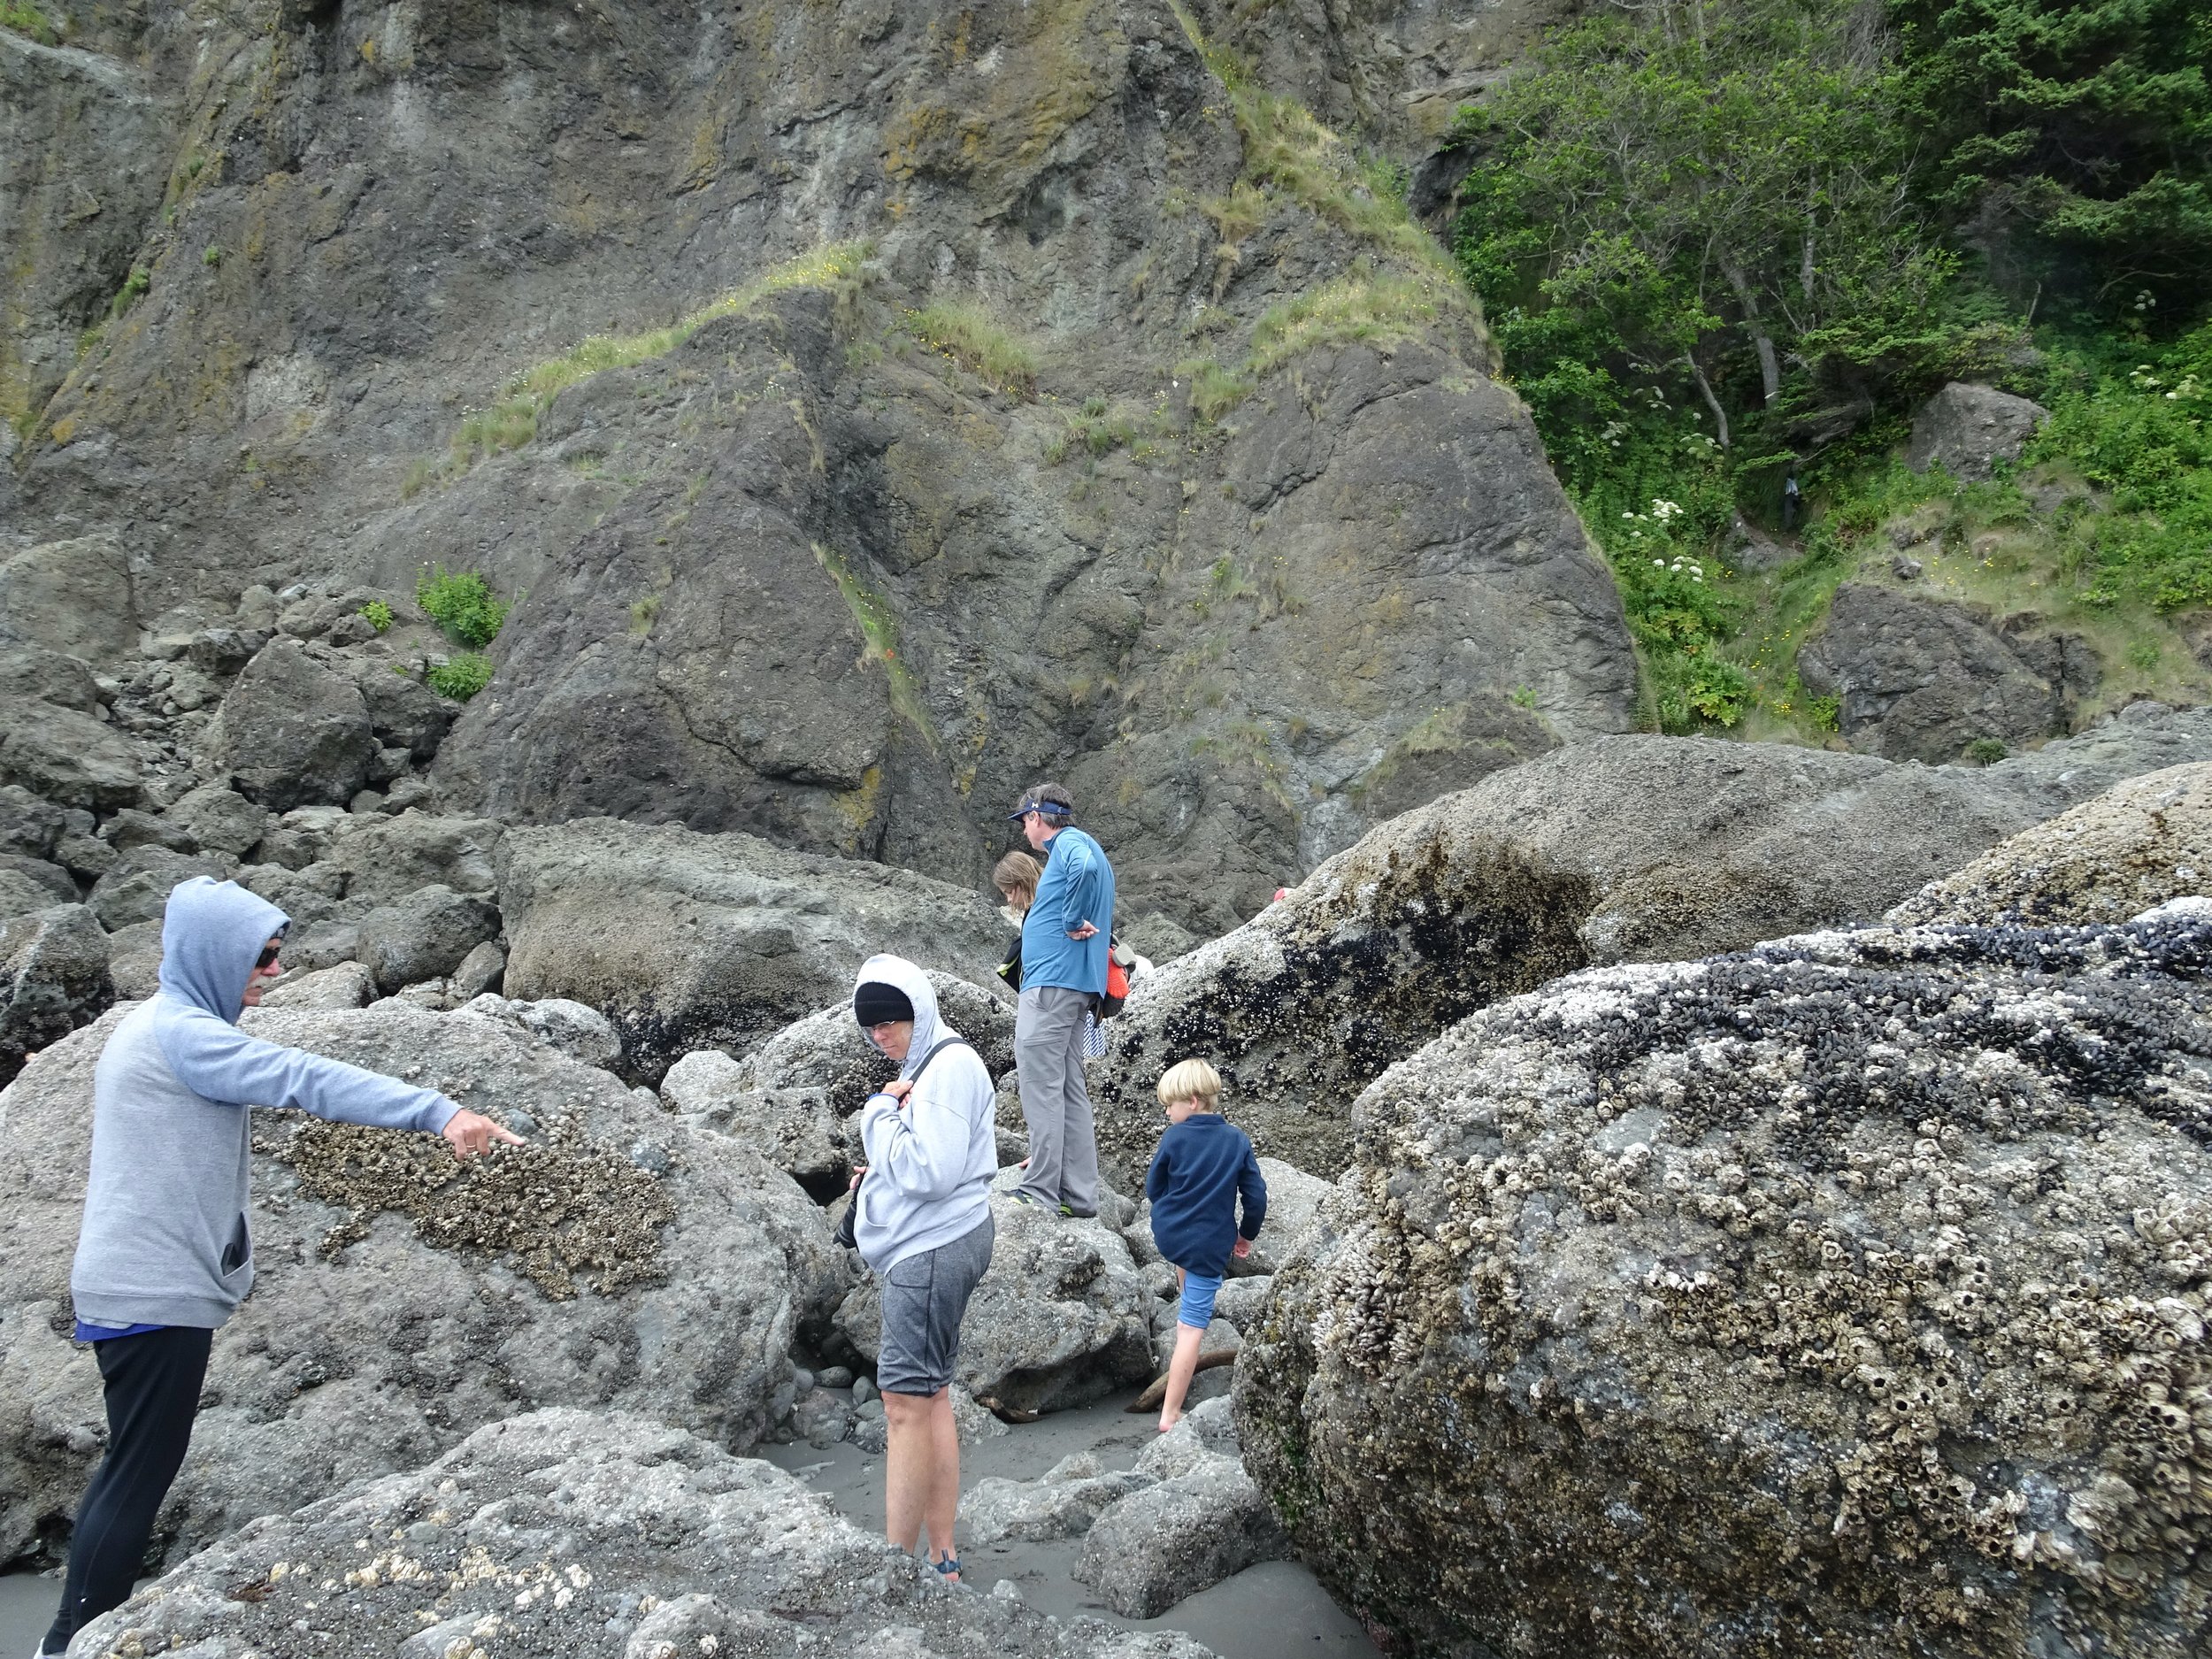 Here are some of the boulders we climbed on for greater access to additional views